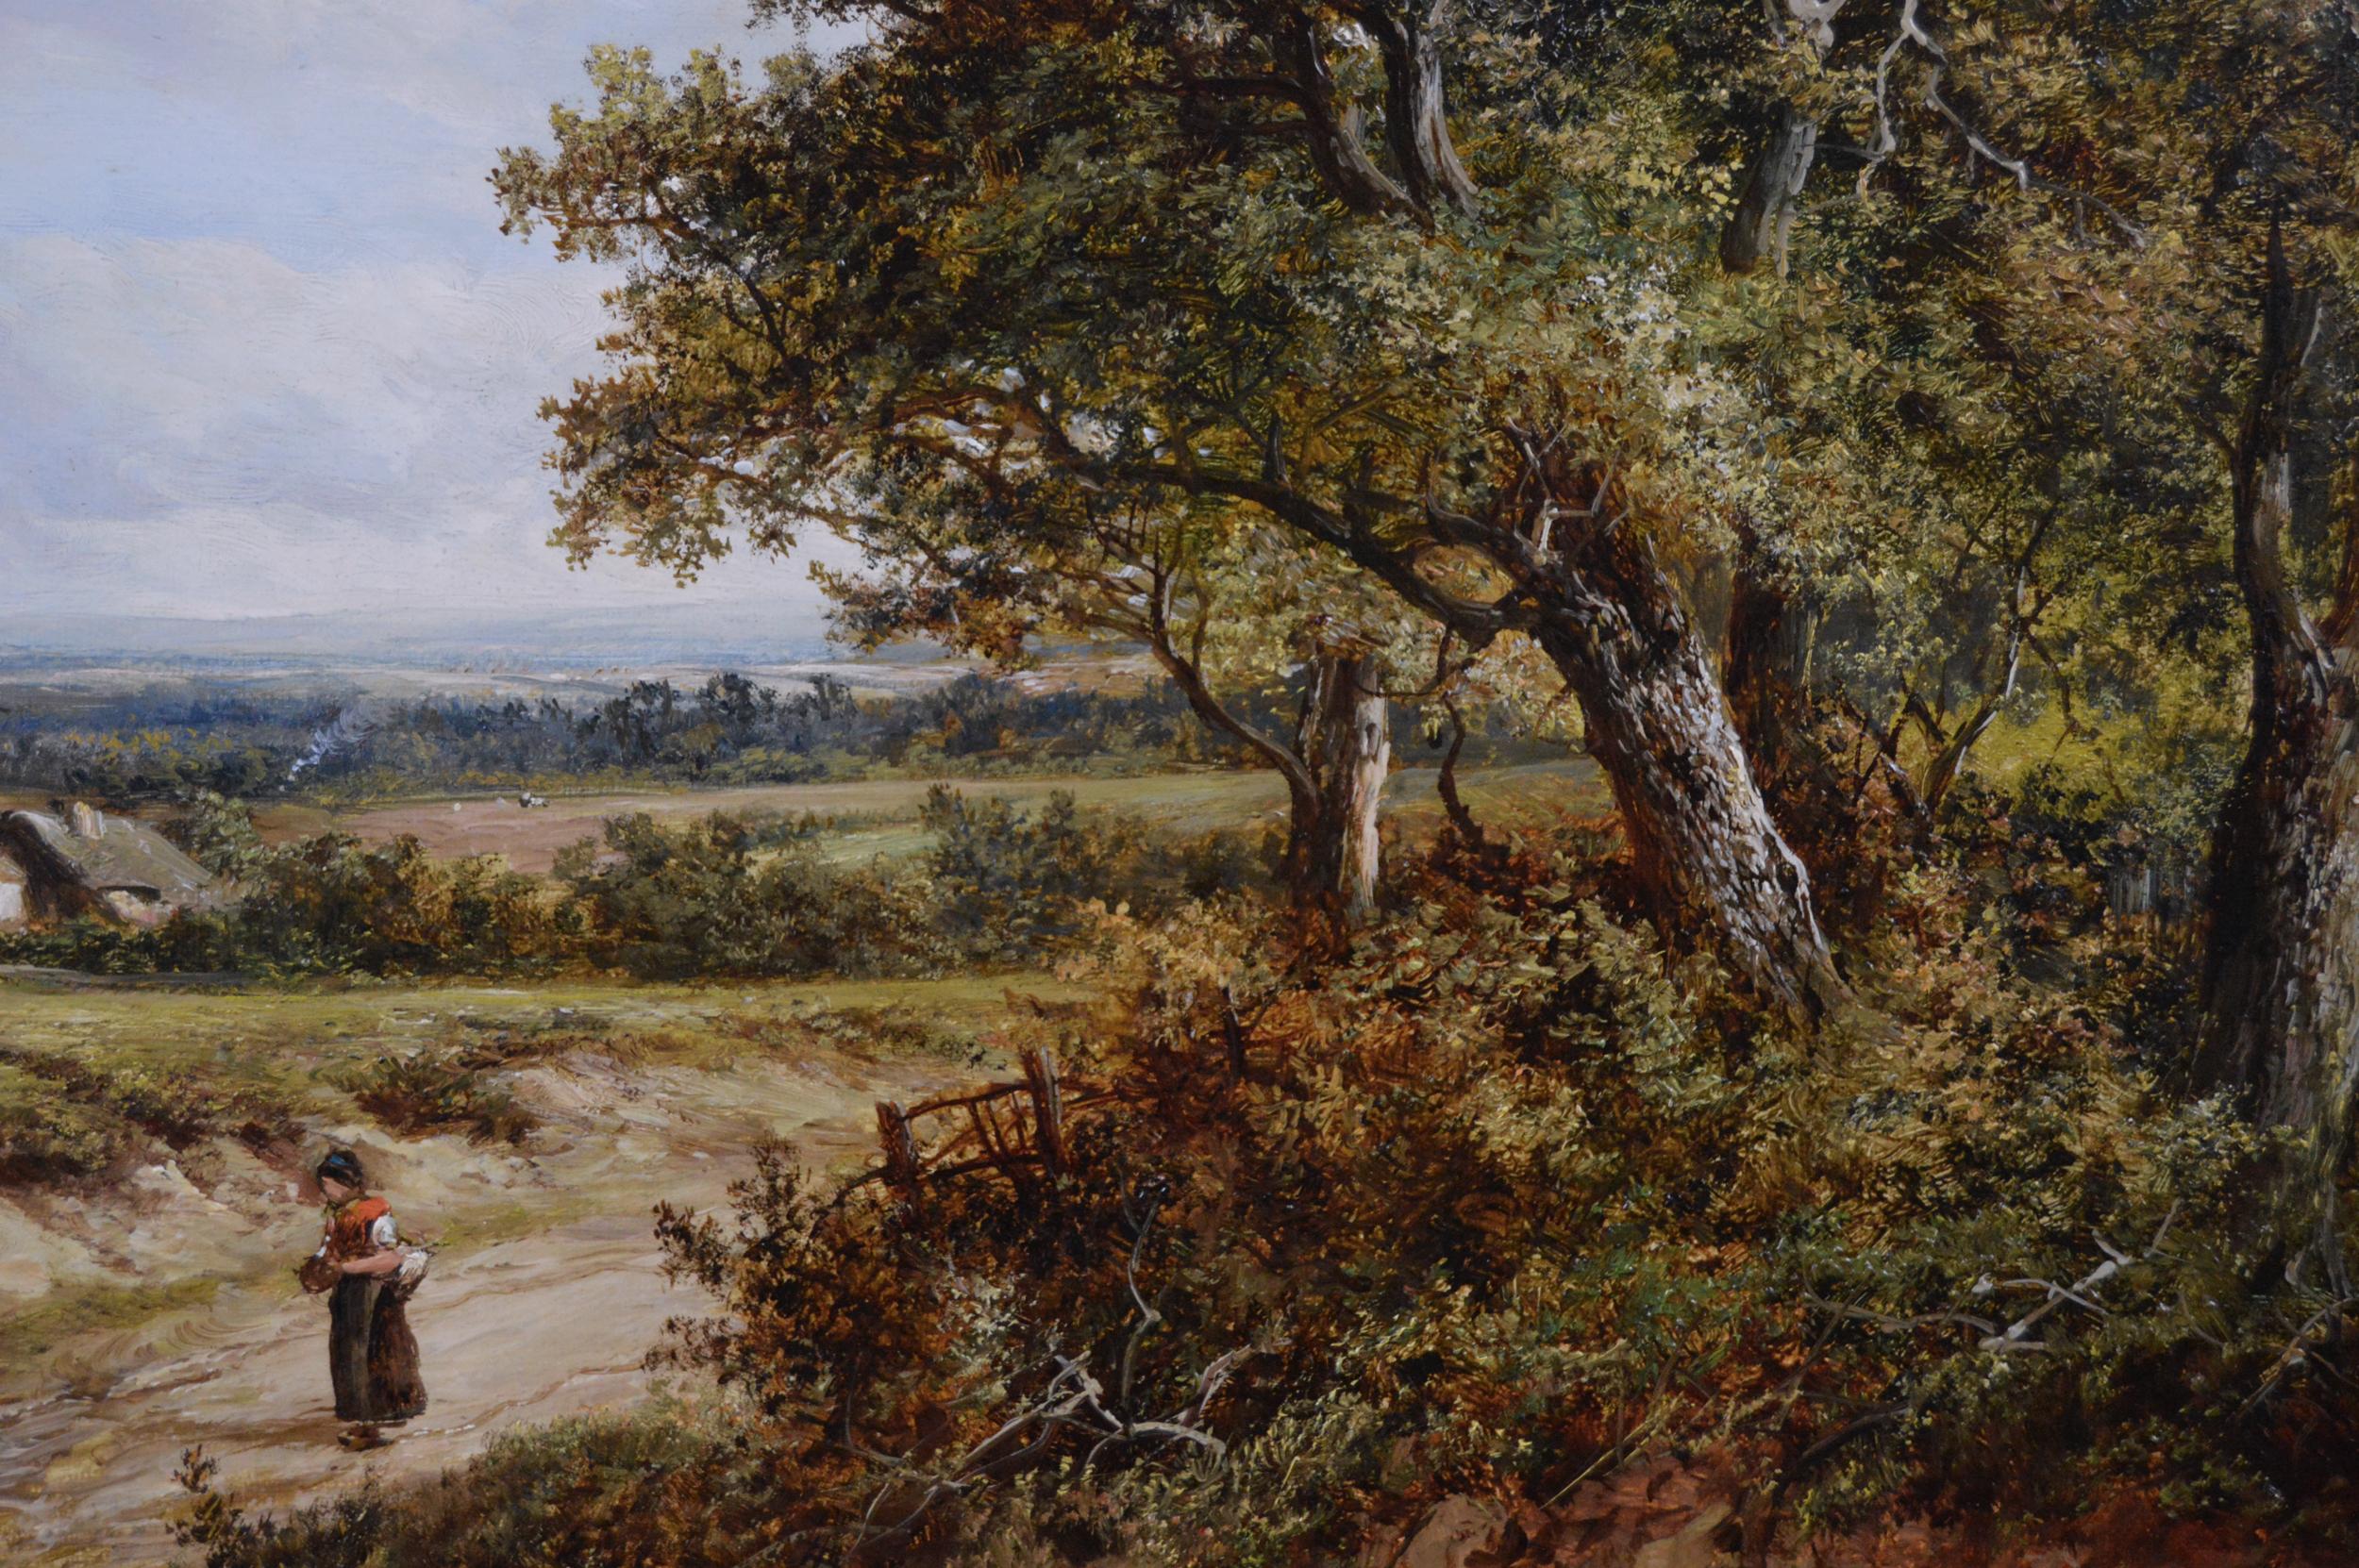 Joseph Thors
British, (1835-1920)
A Country Track
Oil on canvas, signed
Image size: 15.5 inches x 23.25 inches 
Size including frame: 22.75 inches x 30.5 inches

Joseph Thors was born in Amsterdam on 25 August, 1835 the son of Samuel Joseph Thors